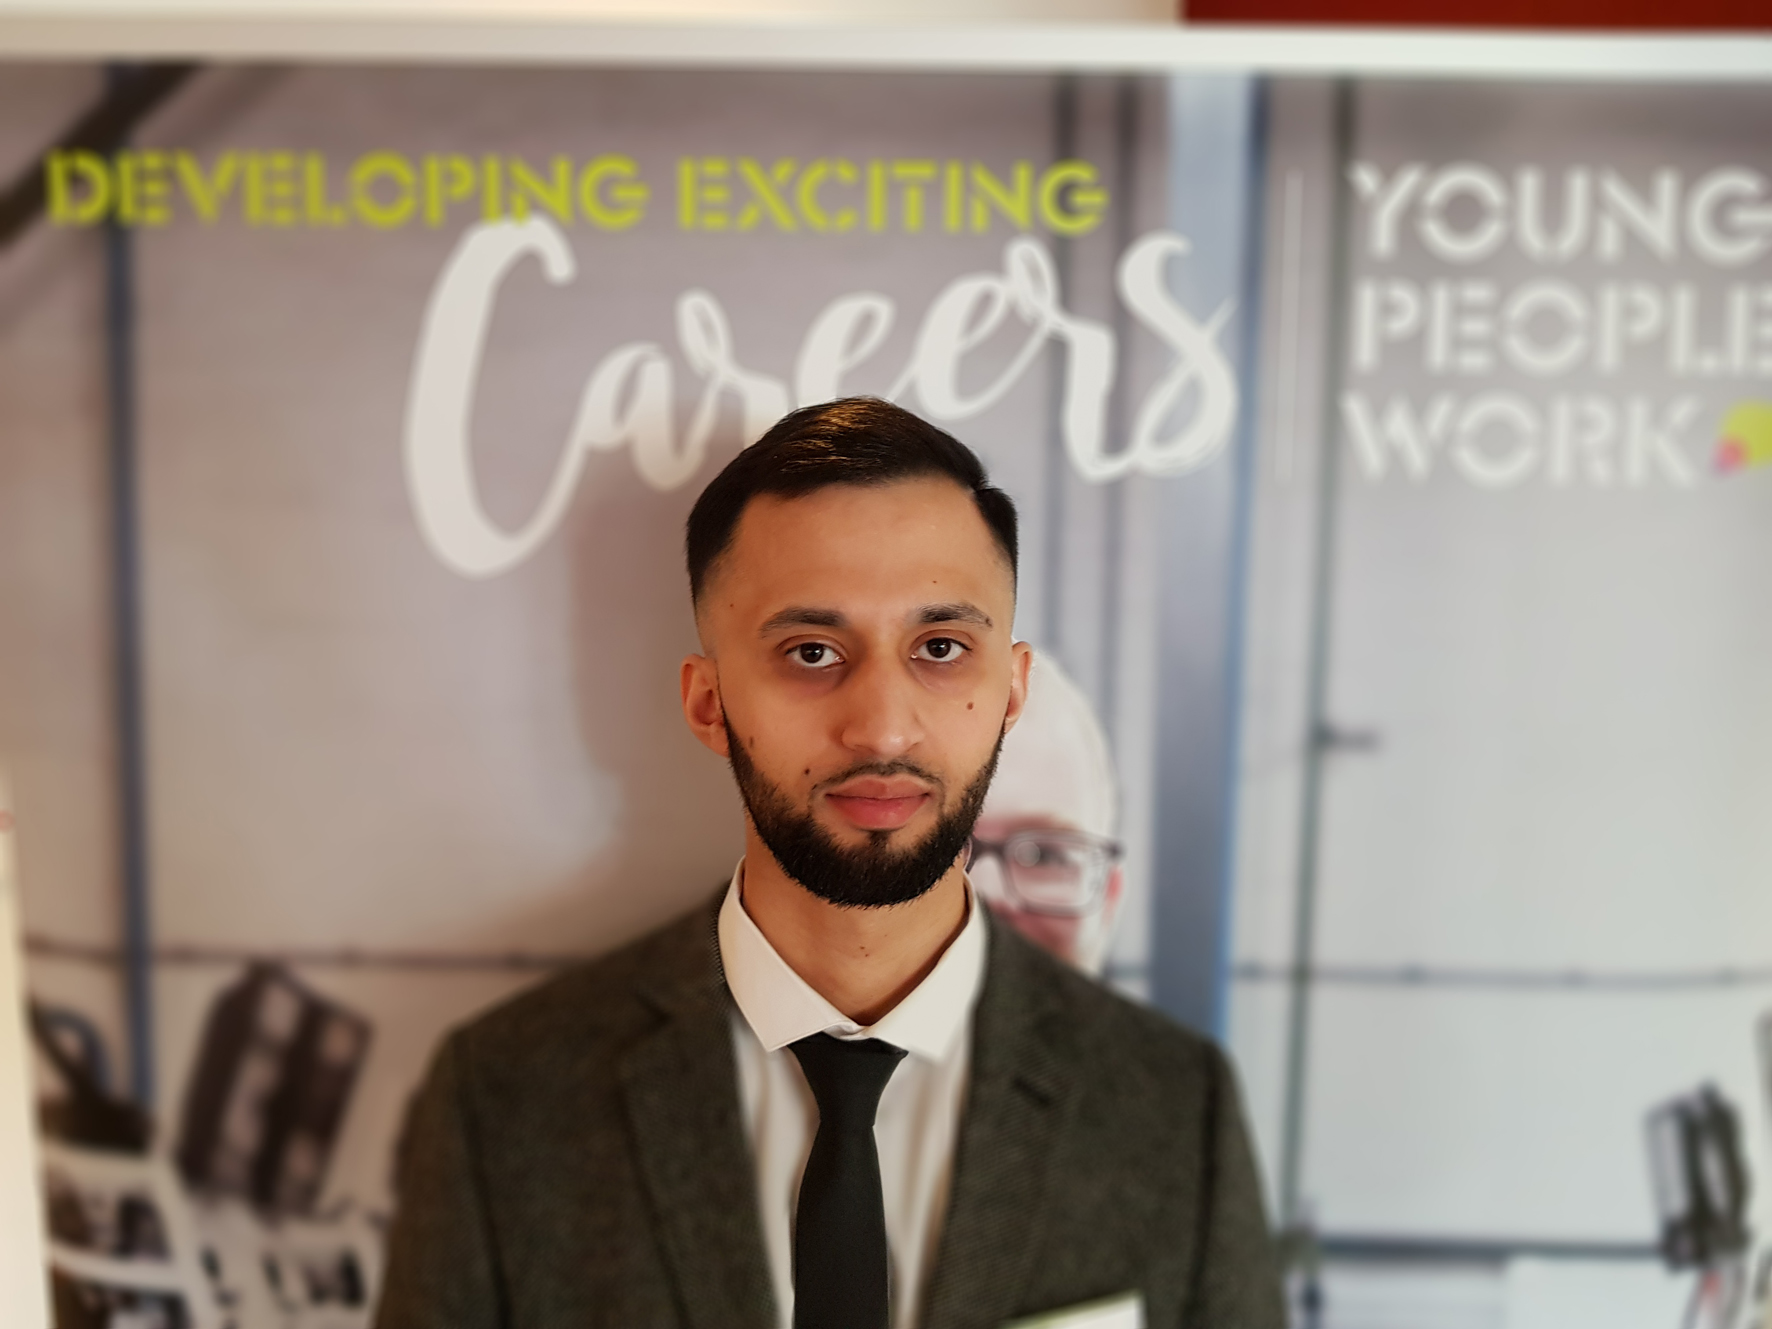 Jawad Bashir, 24, from Small Heath, has a degree in chemical engineering but struggled to find a job due to a lack of work experience. A work placement helped Jawad find a job - now he's backing the introduction of 1,000 work placements for young people in the West Midlands.